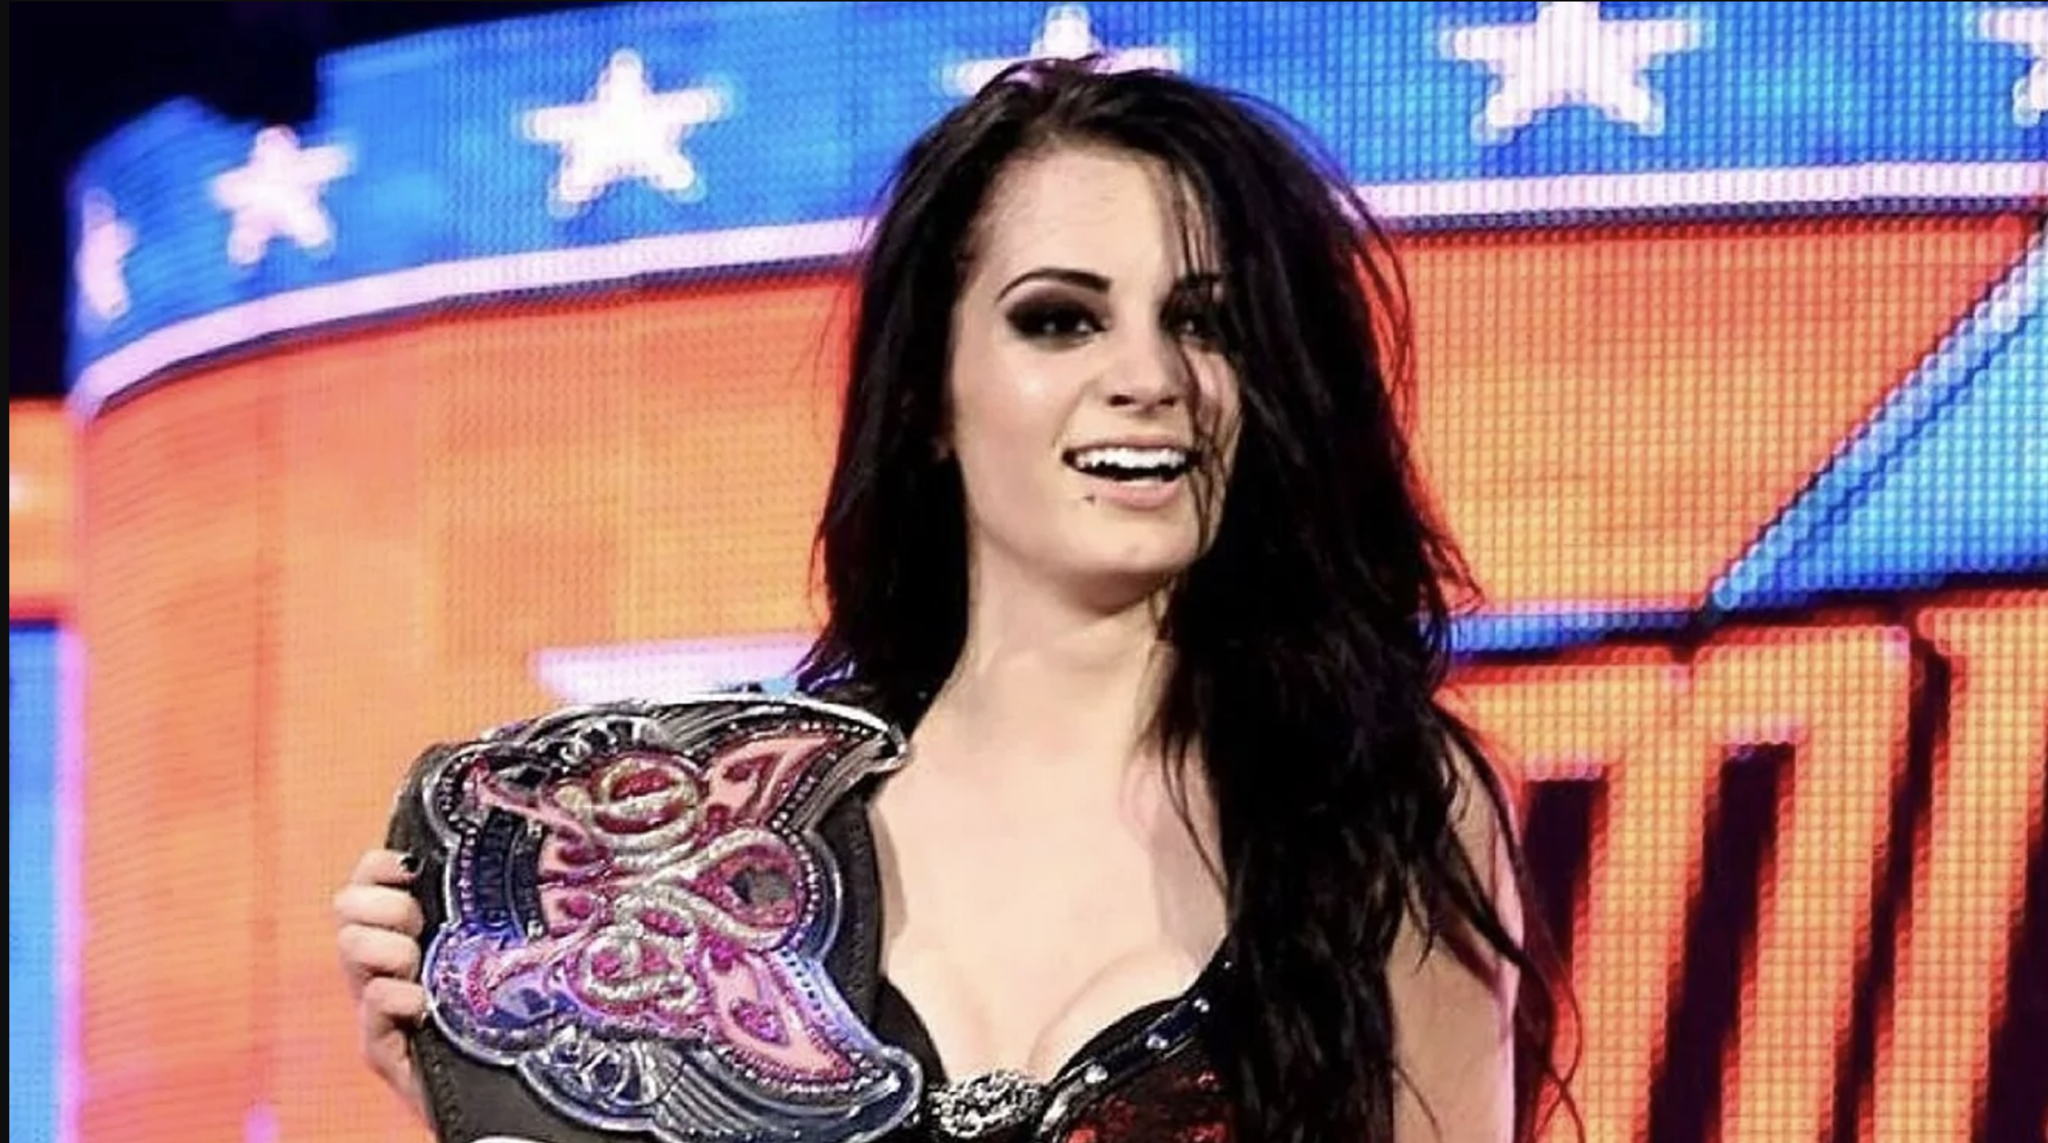 A career full of controversy: Paige's WWE journey